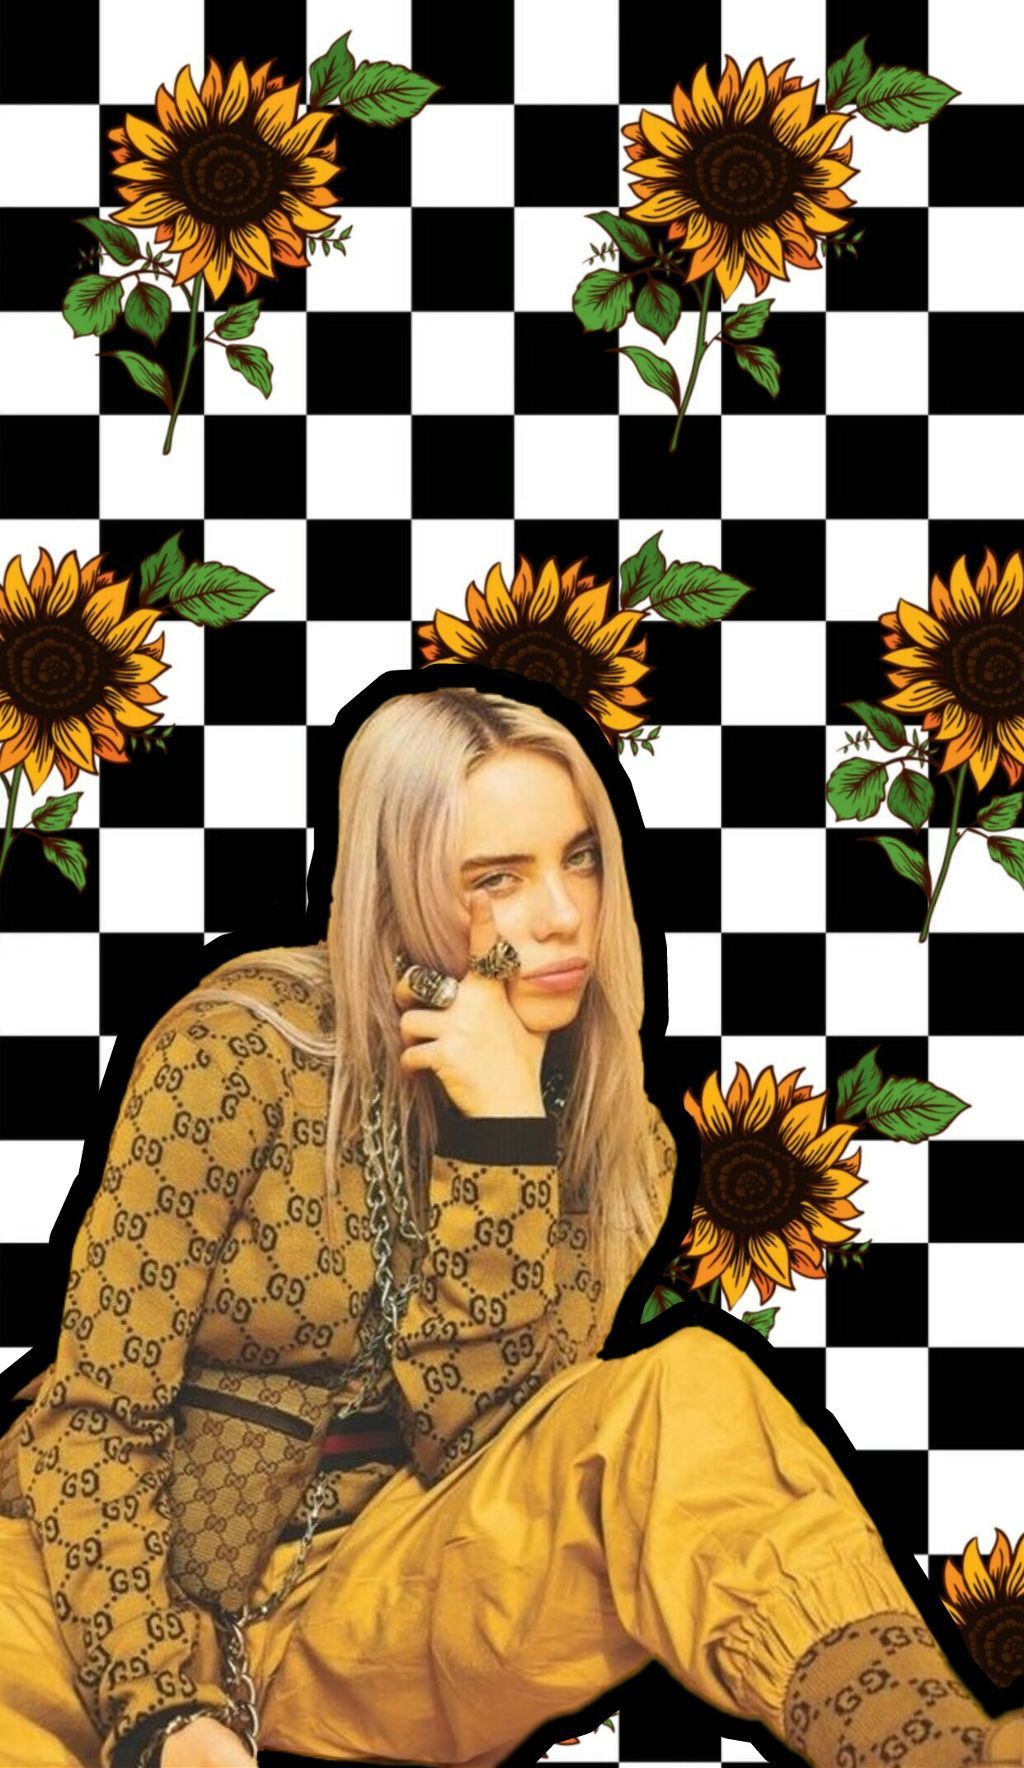 Billie Eilish wallpaper I made! Comment your favorite song by her! - Billie Eilish